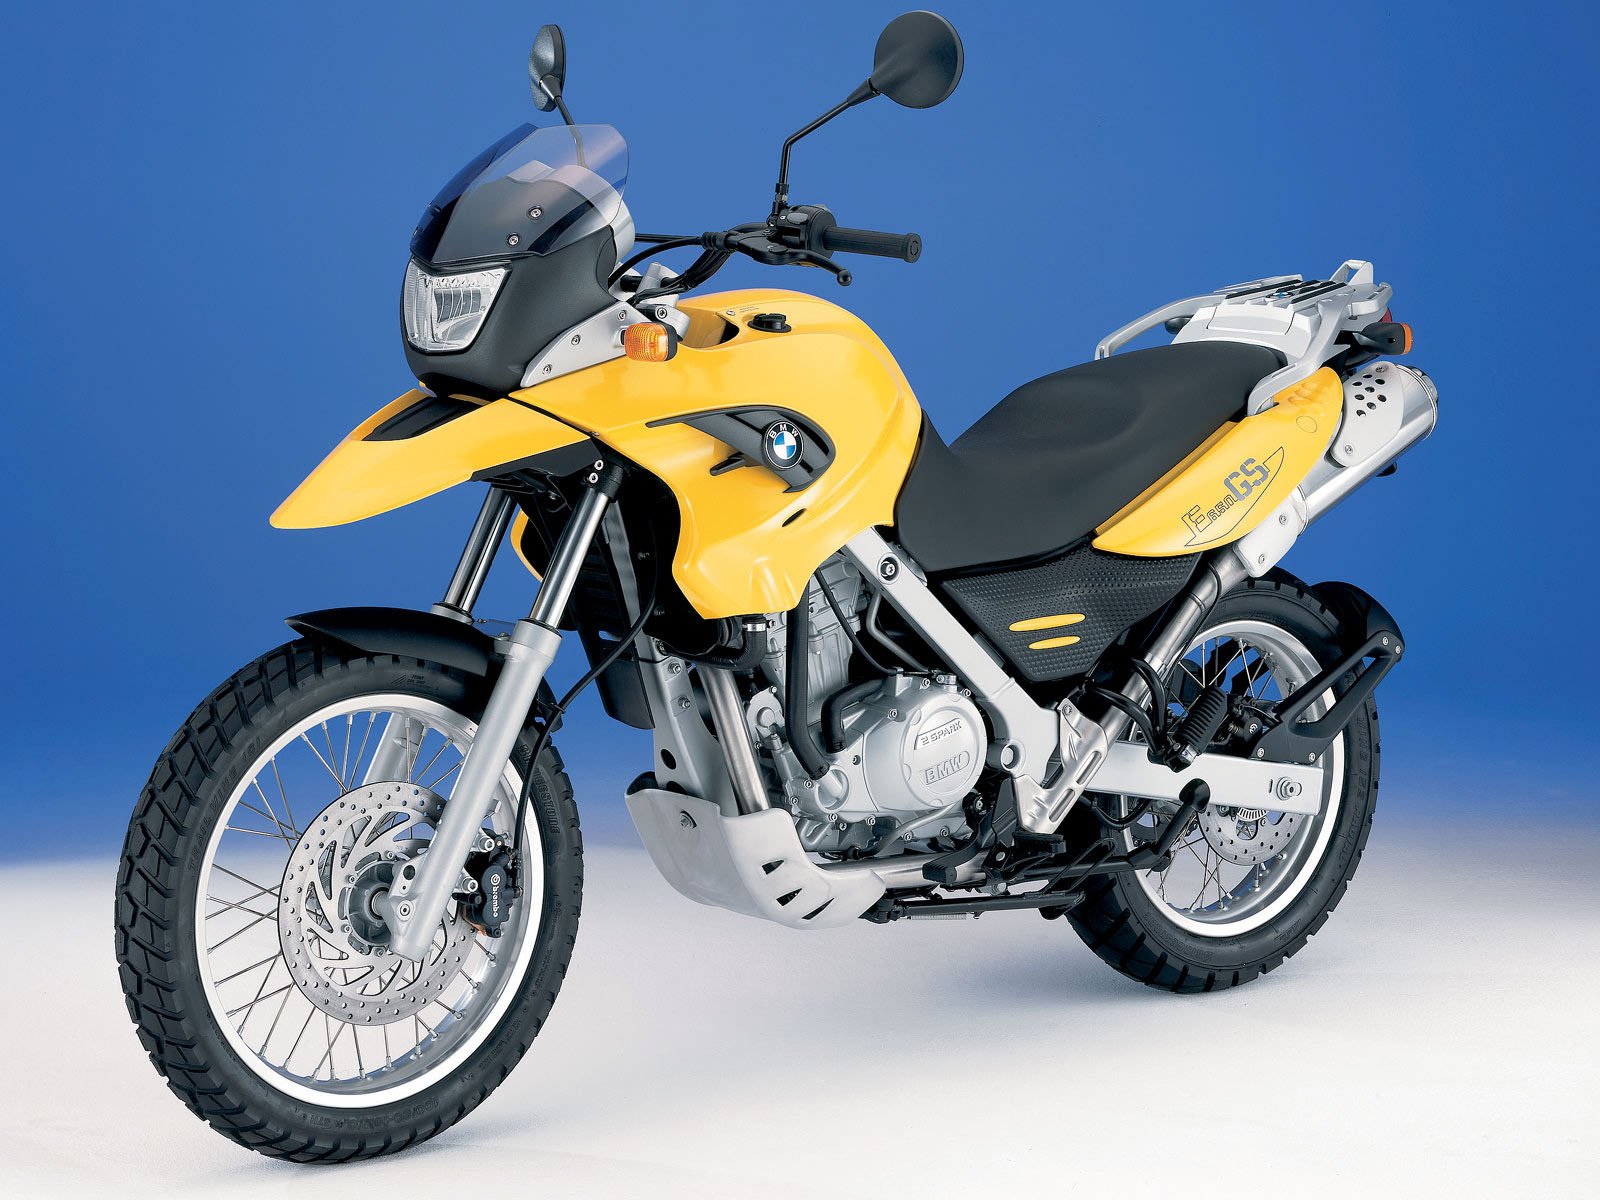 bmw, F 650 gs, Motorcycles, 2003 Wallpaper